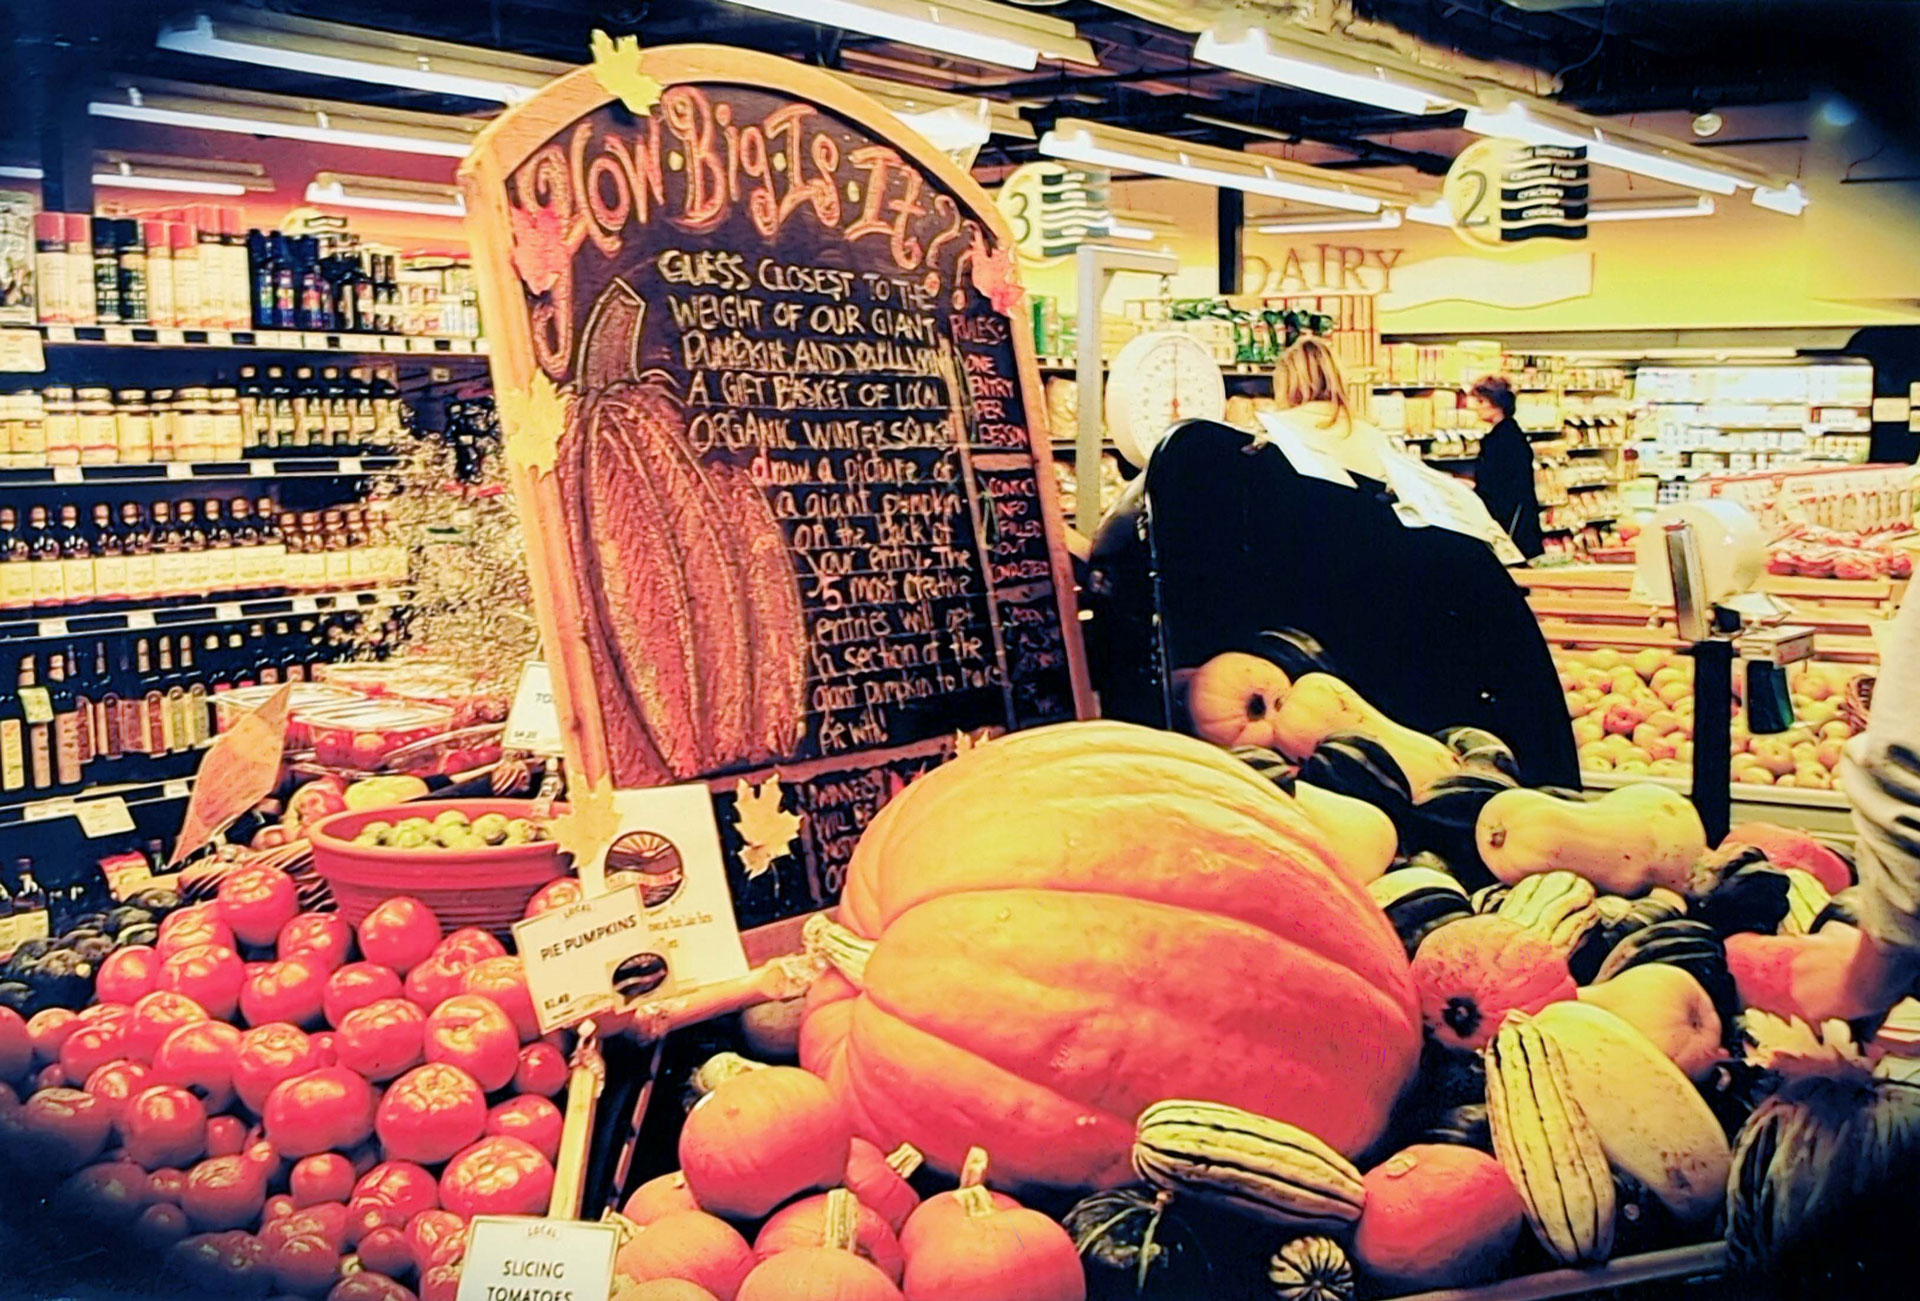 A charming display at the Whole Foods Coop Duluth MN features various pumpkins, squash, and gourds. A large pumpkin is surrounded by smaller produce. A blackboard sign invites customers to guess the weight of the giant pumpkin. Shelves of canned and bottled goods are in the background.